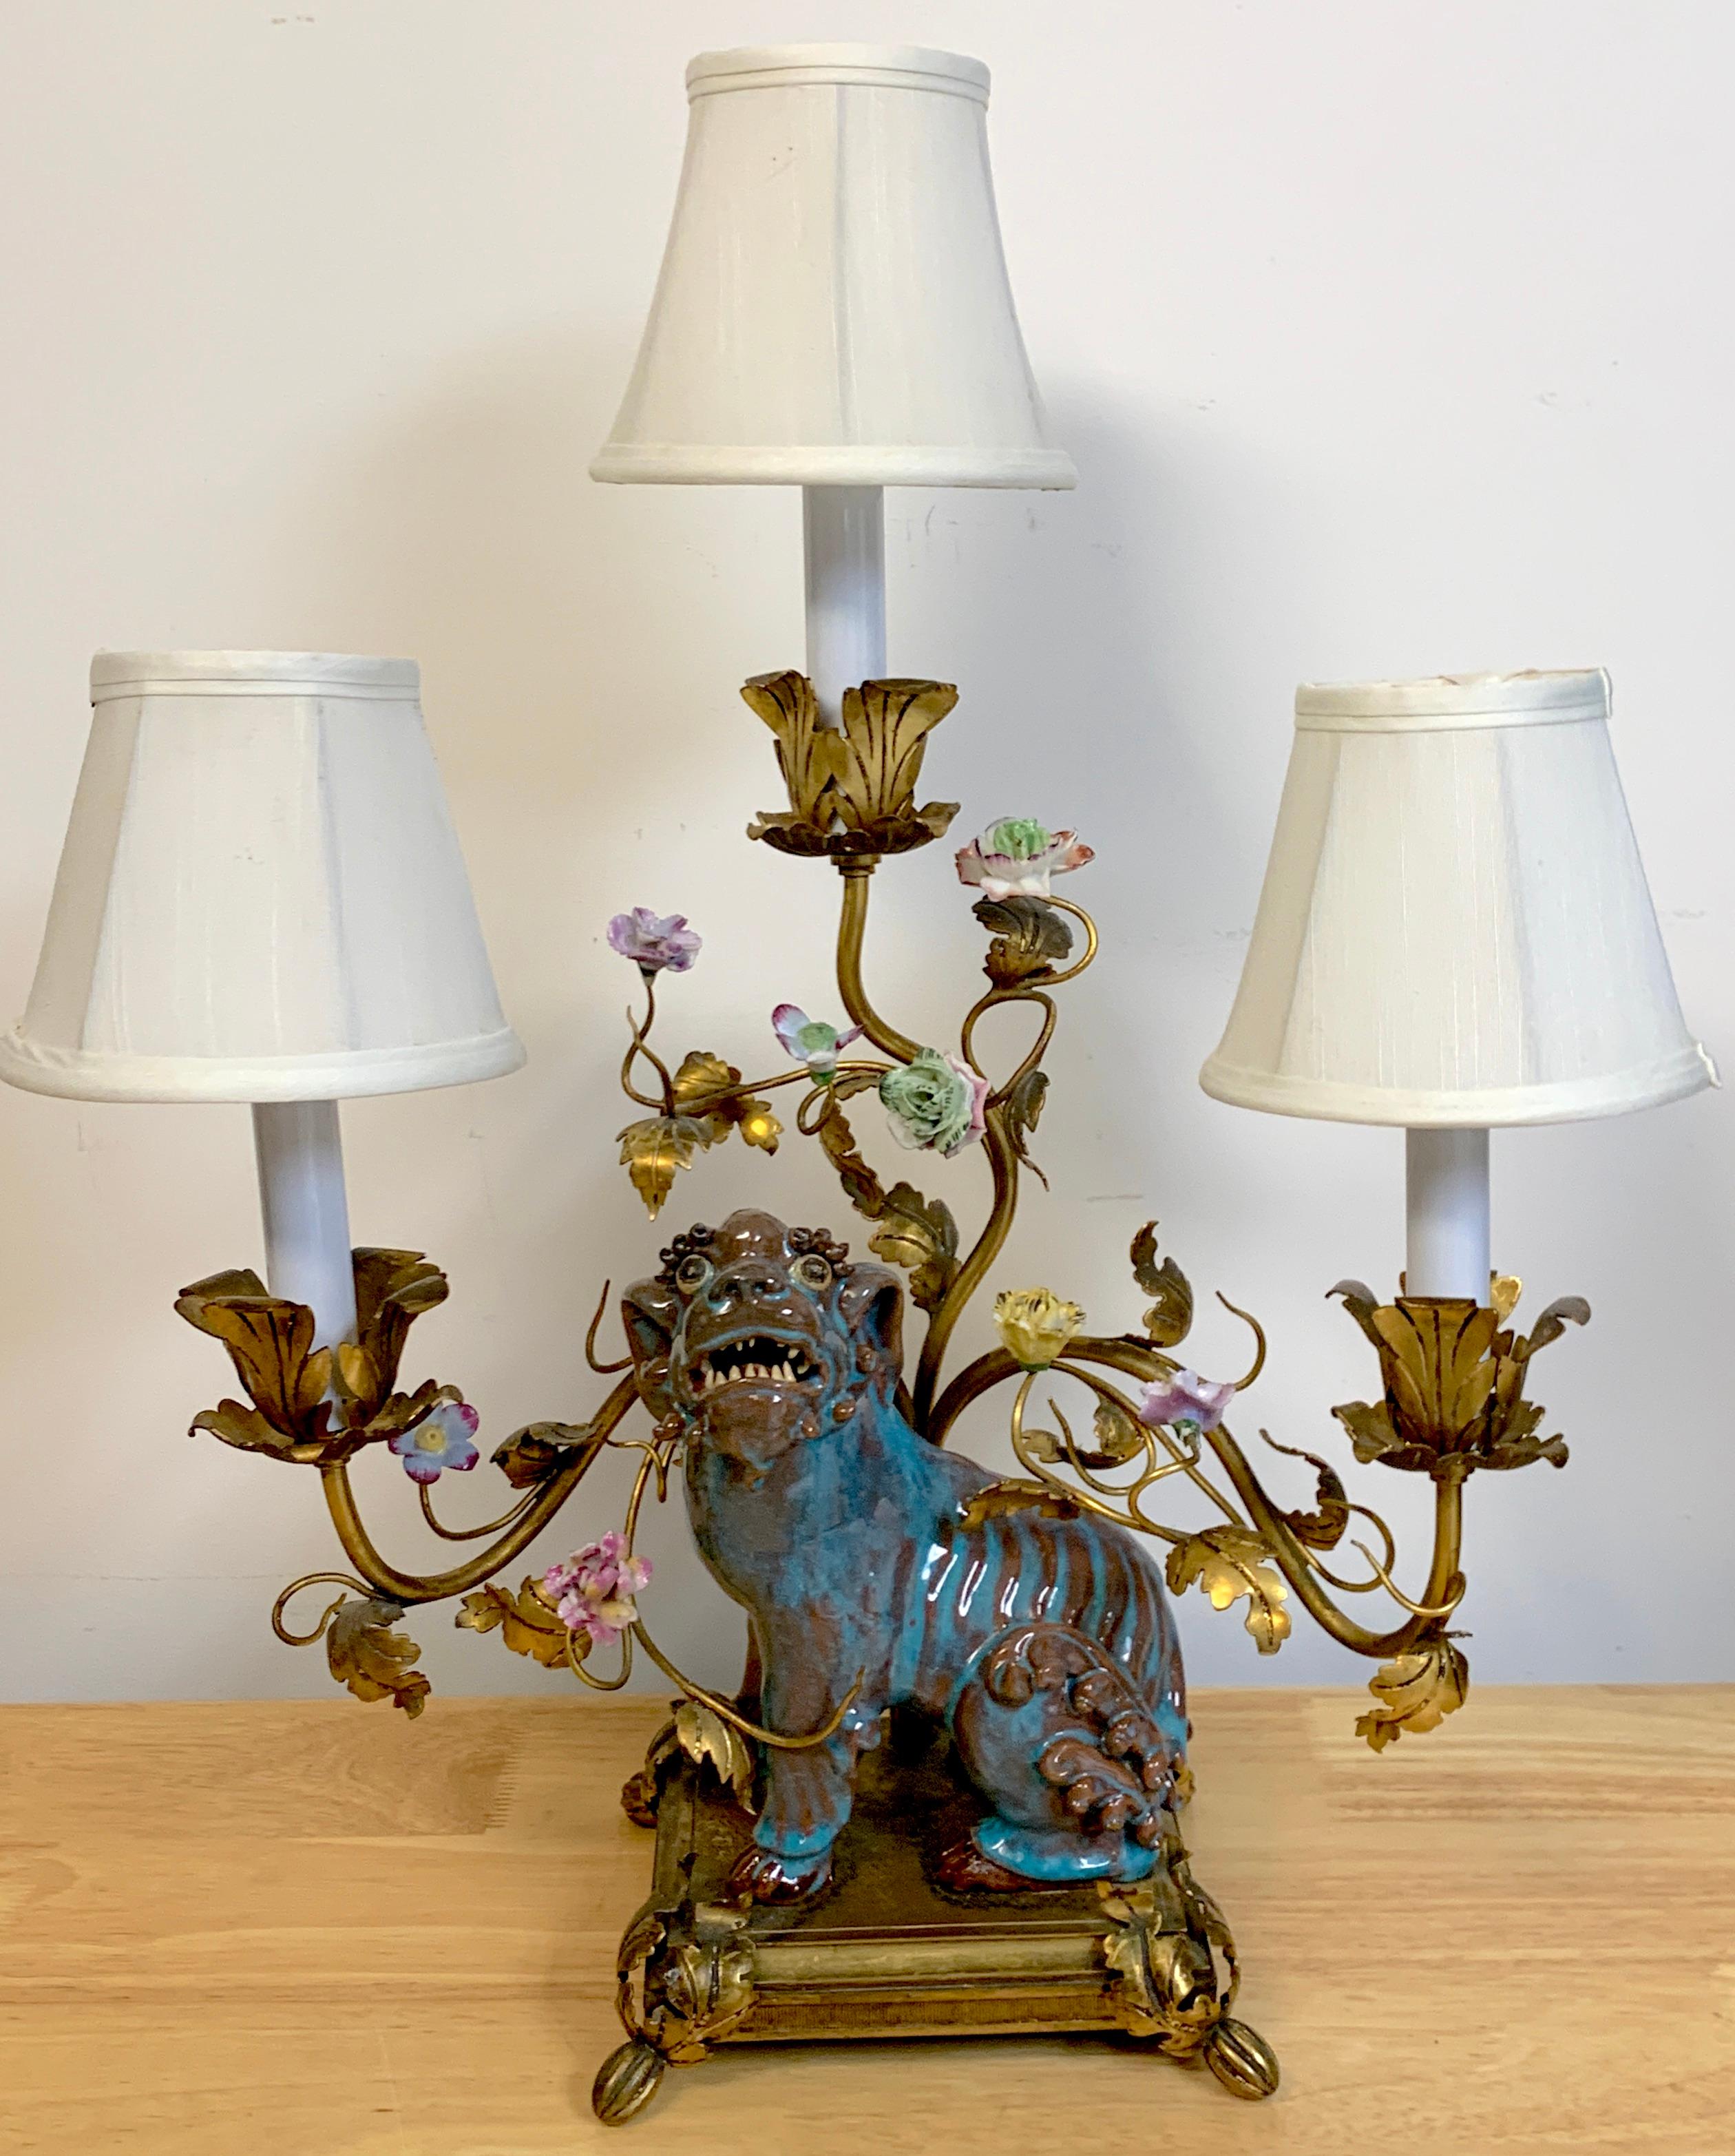 Late Qing Chinese Expot Fu Dog mounted with French bronze mounts as a lamp, Shiwan glazed seated Fu dog surrounded with French porcelain flowers, and three candelabra lights, raised on a bronze base with
The base measures 7.5